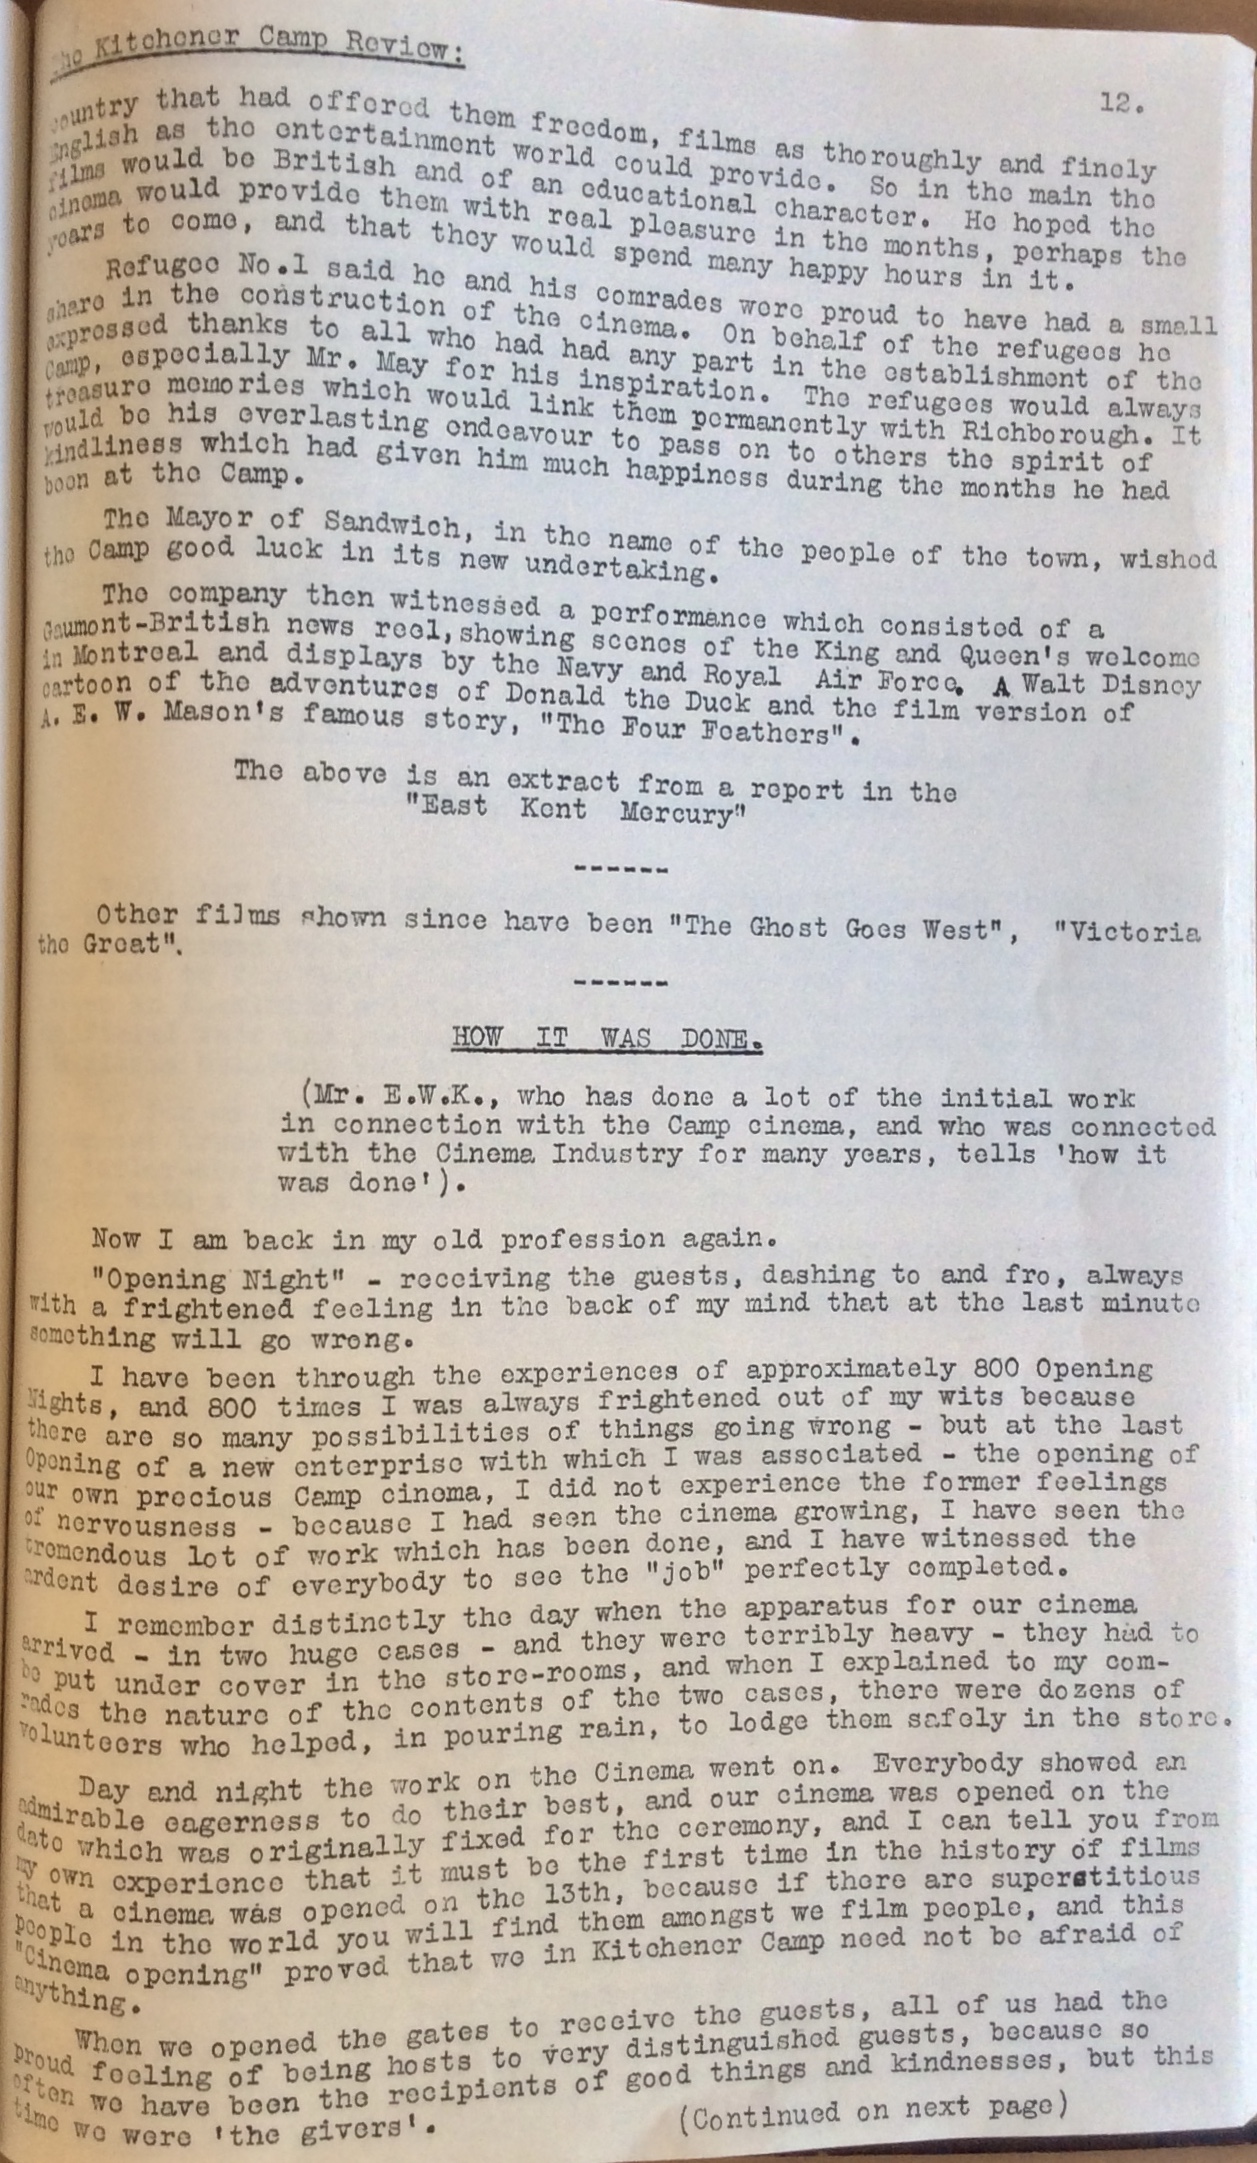 The Kitchener Camp Review, July 1939, No. 5, page 12